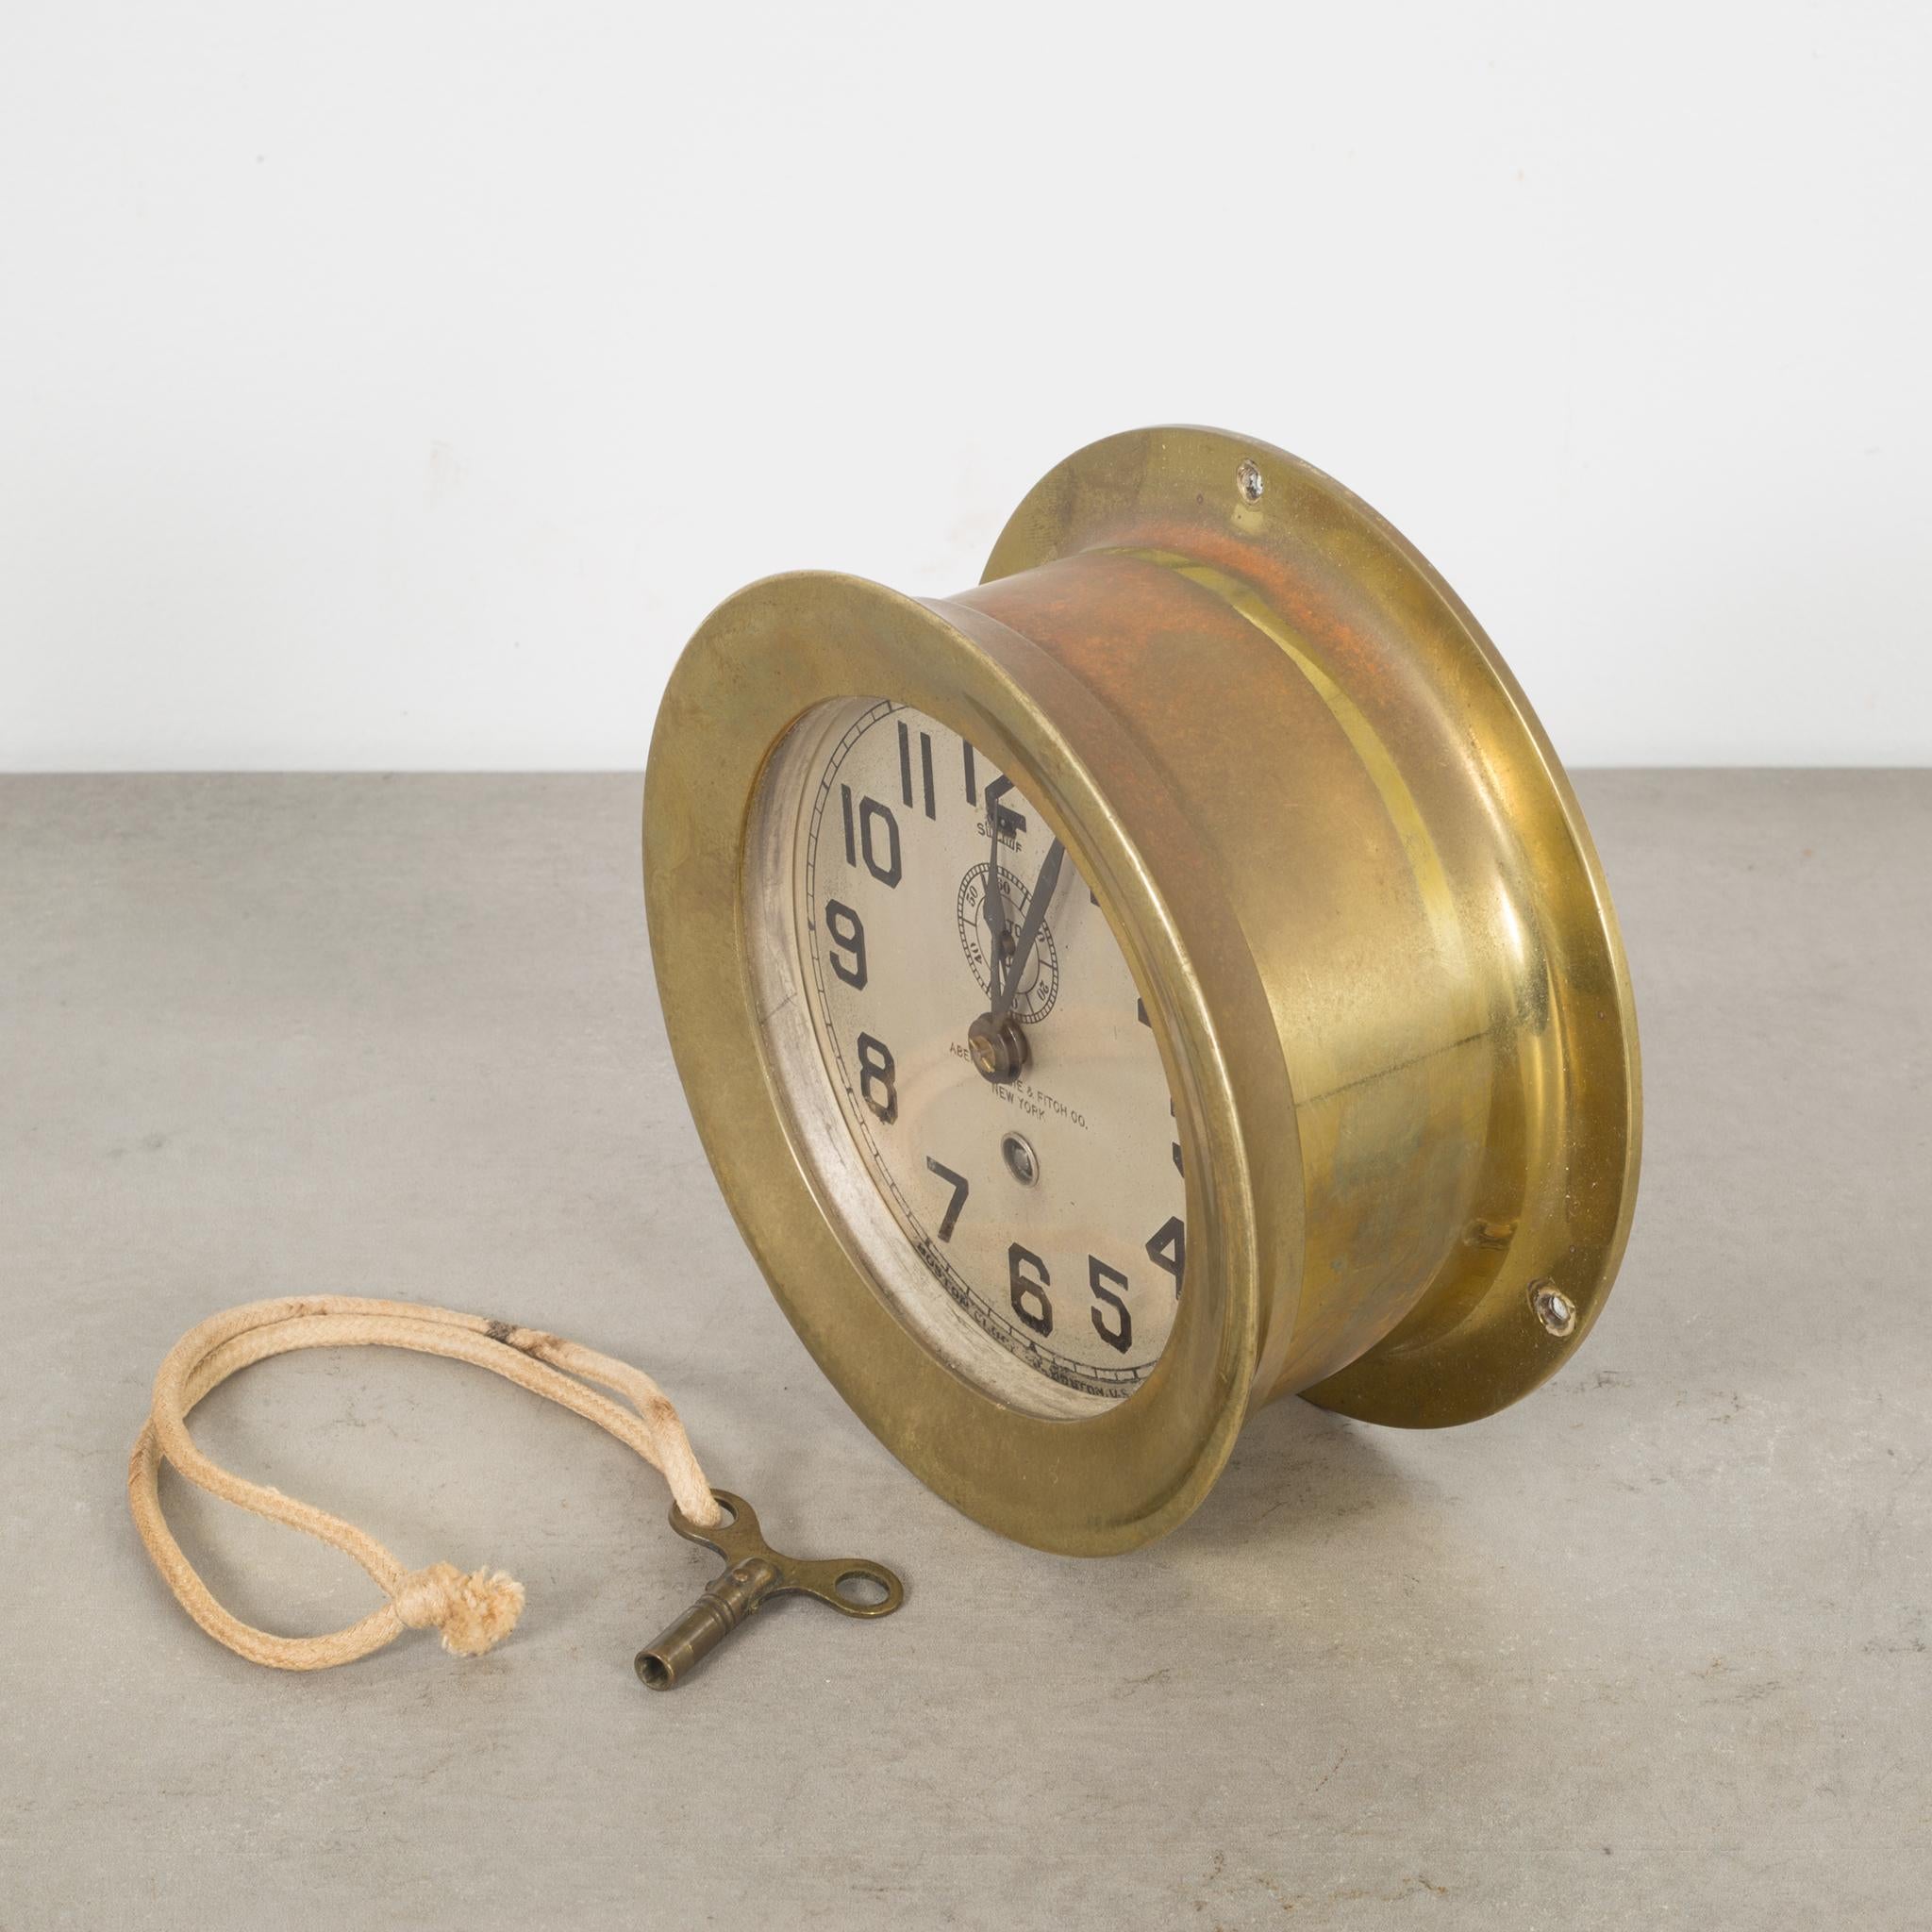 About:

This is a brass Boston 8 Day clock with second hand and original key manufactured by Chelsea Clock Company for Abercrombie and Fitch Co. The face is metal with enameled numbers. The inside movement is not brass. The top unscrews for